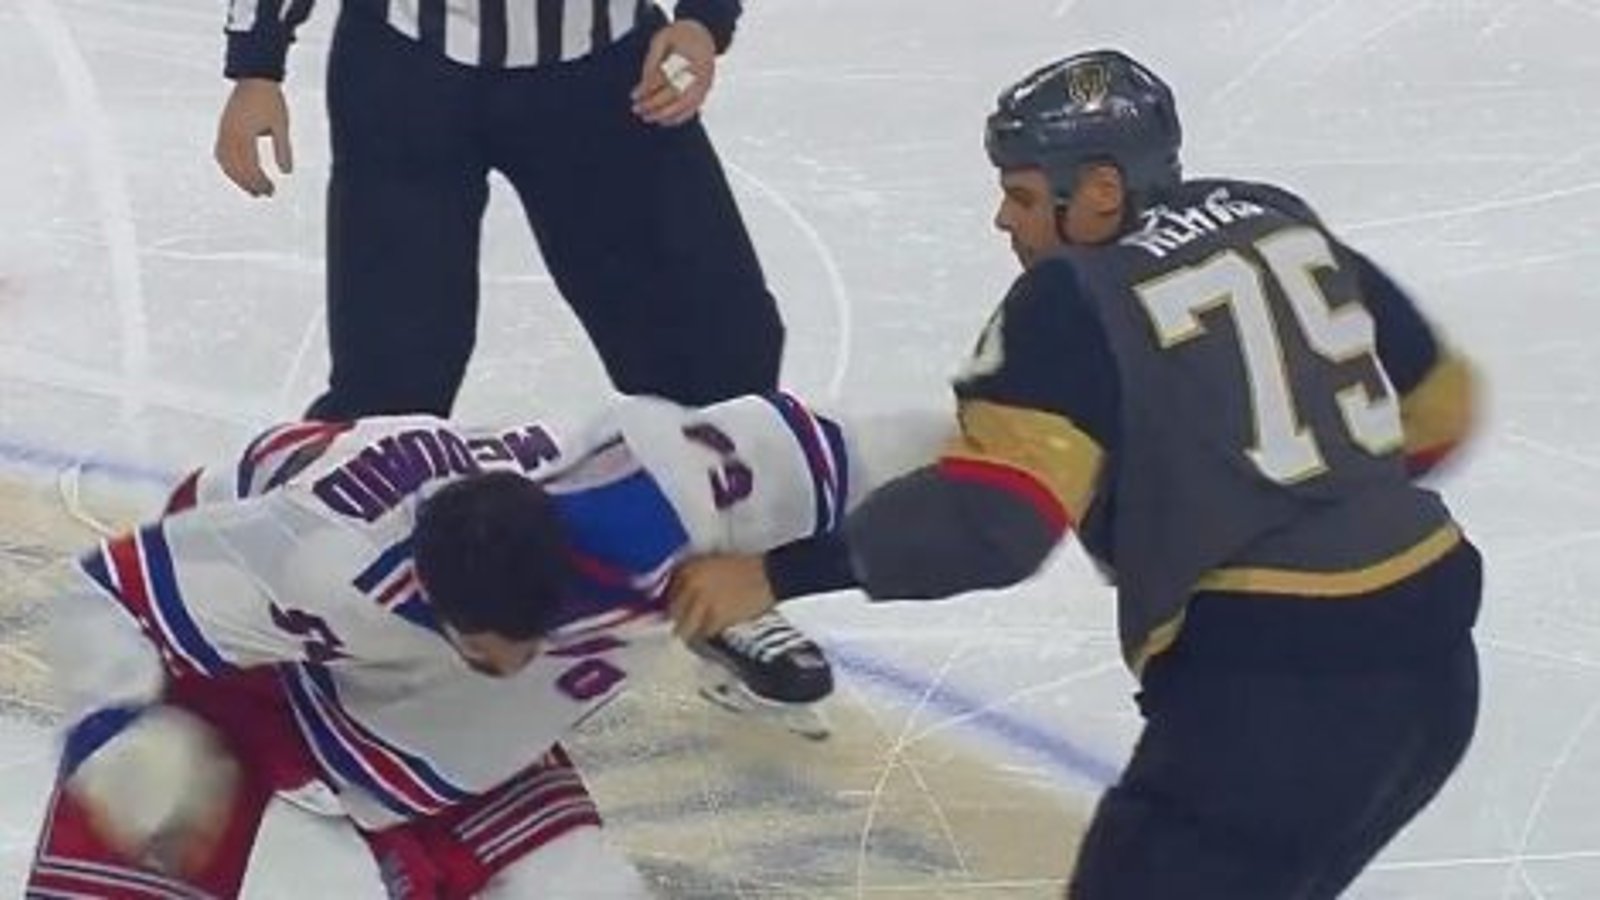 Reaves trades massive bombs with McQuaid in most heavyweight bout of the season! 